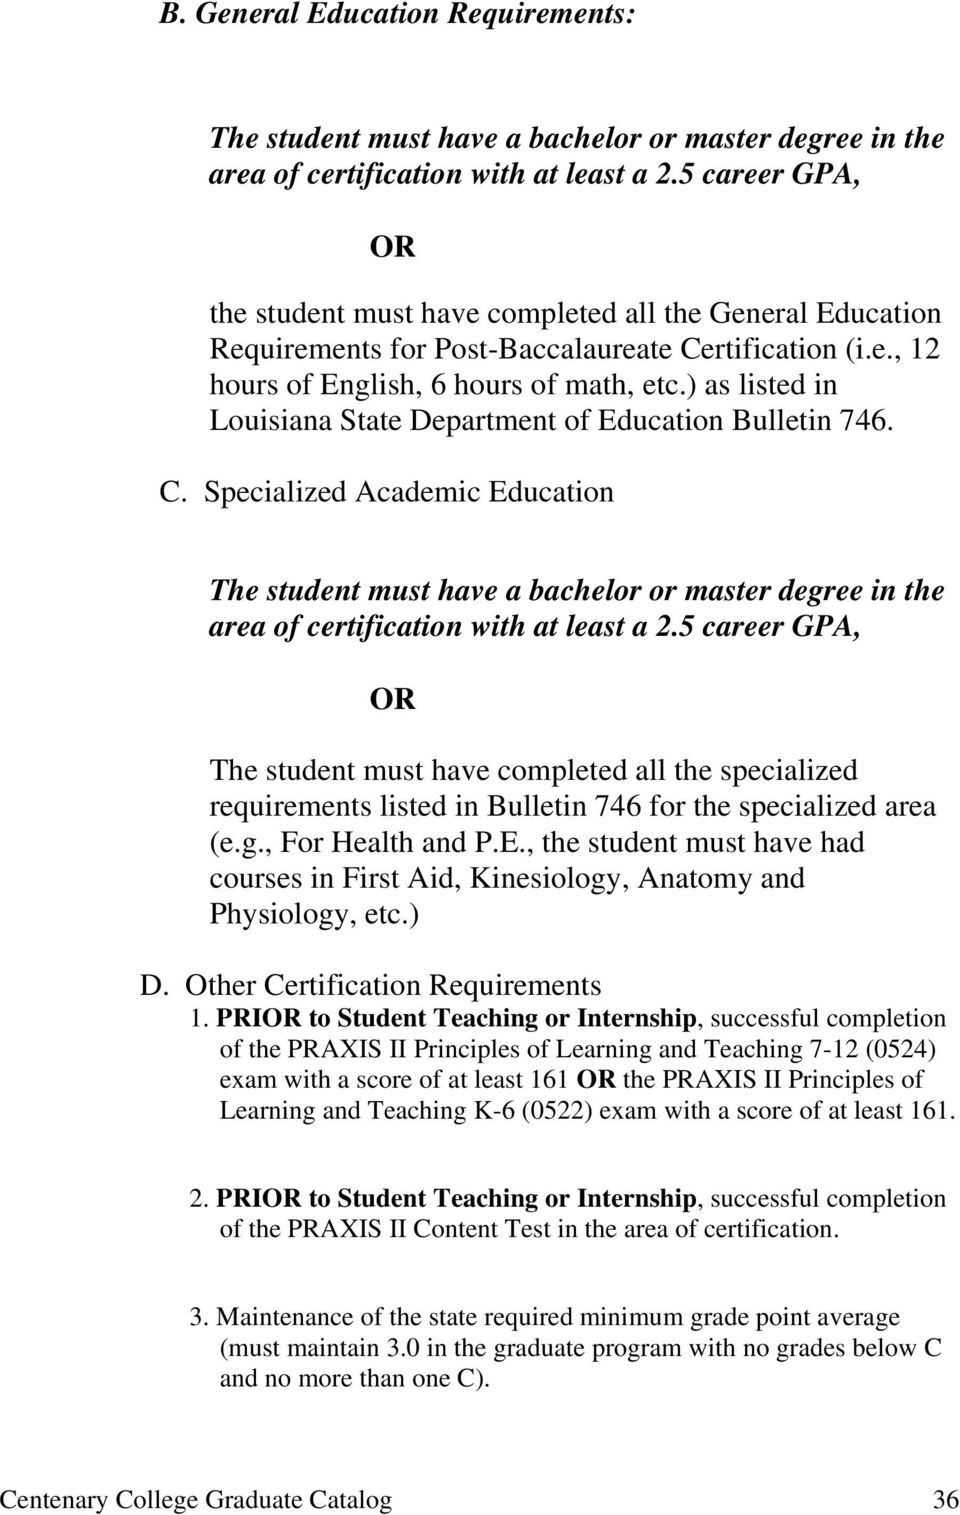 ) as listed in Louisiana State Department of Education Bulletin 746. C. Specialized Academic Education The student must have a bachelor or master degree in the area of certification with at least a 2.